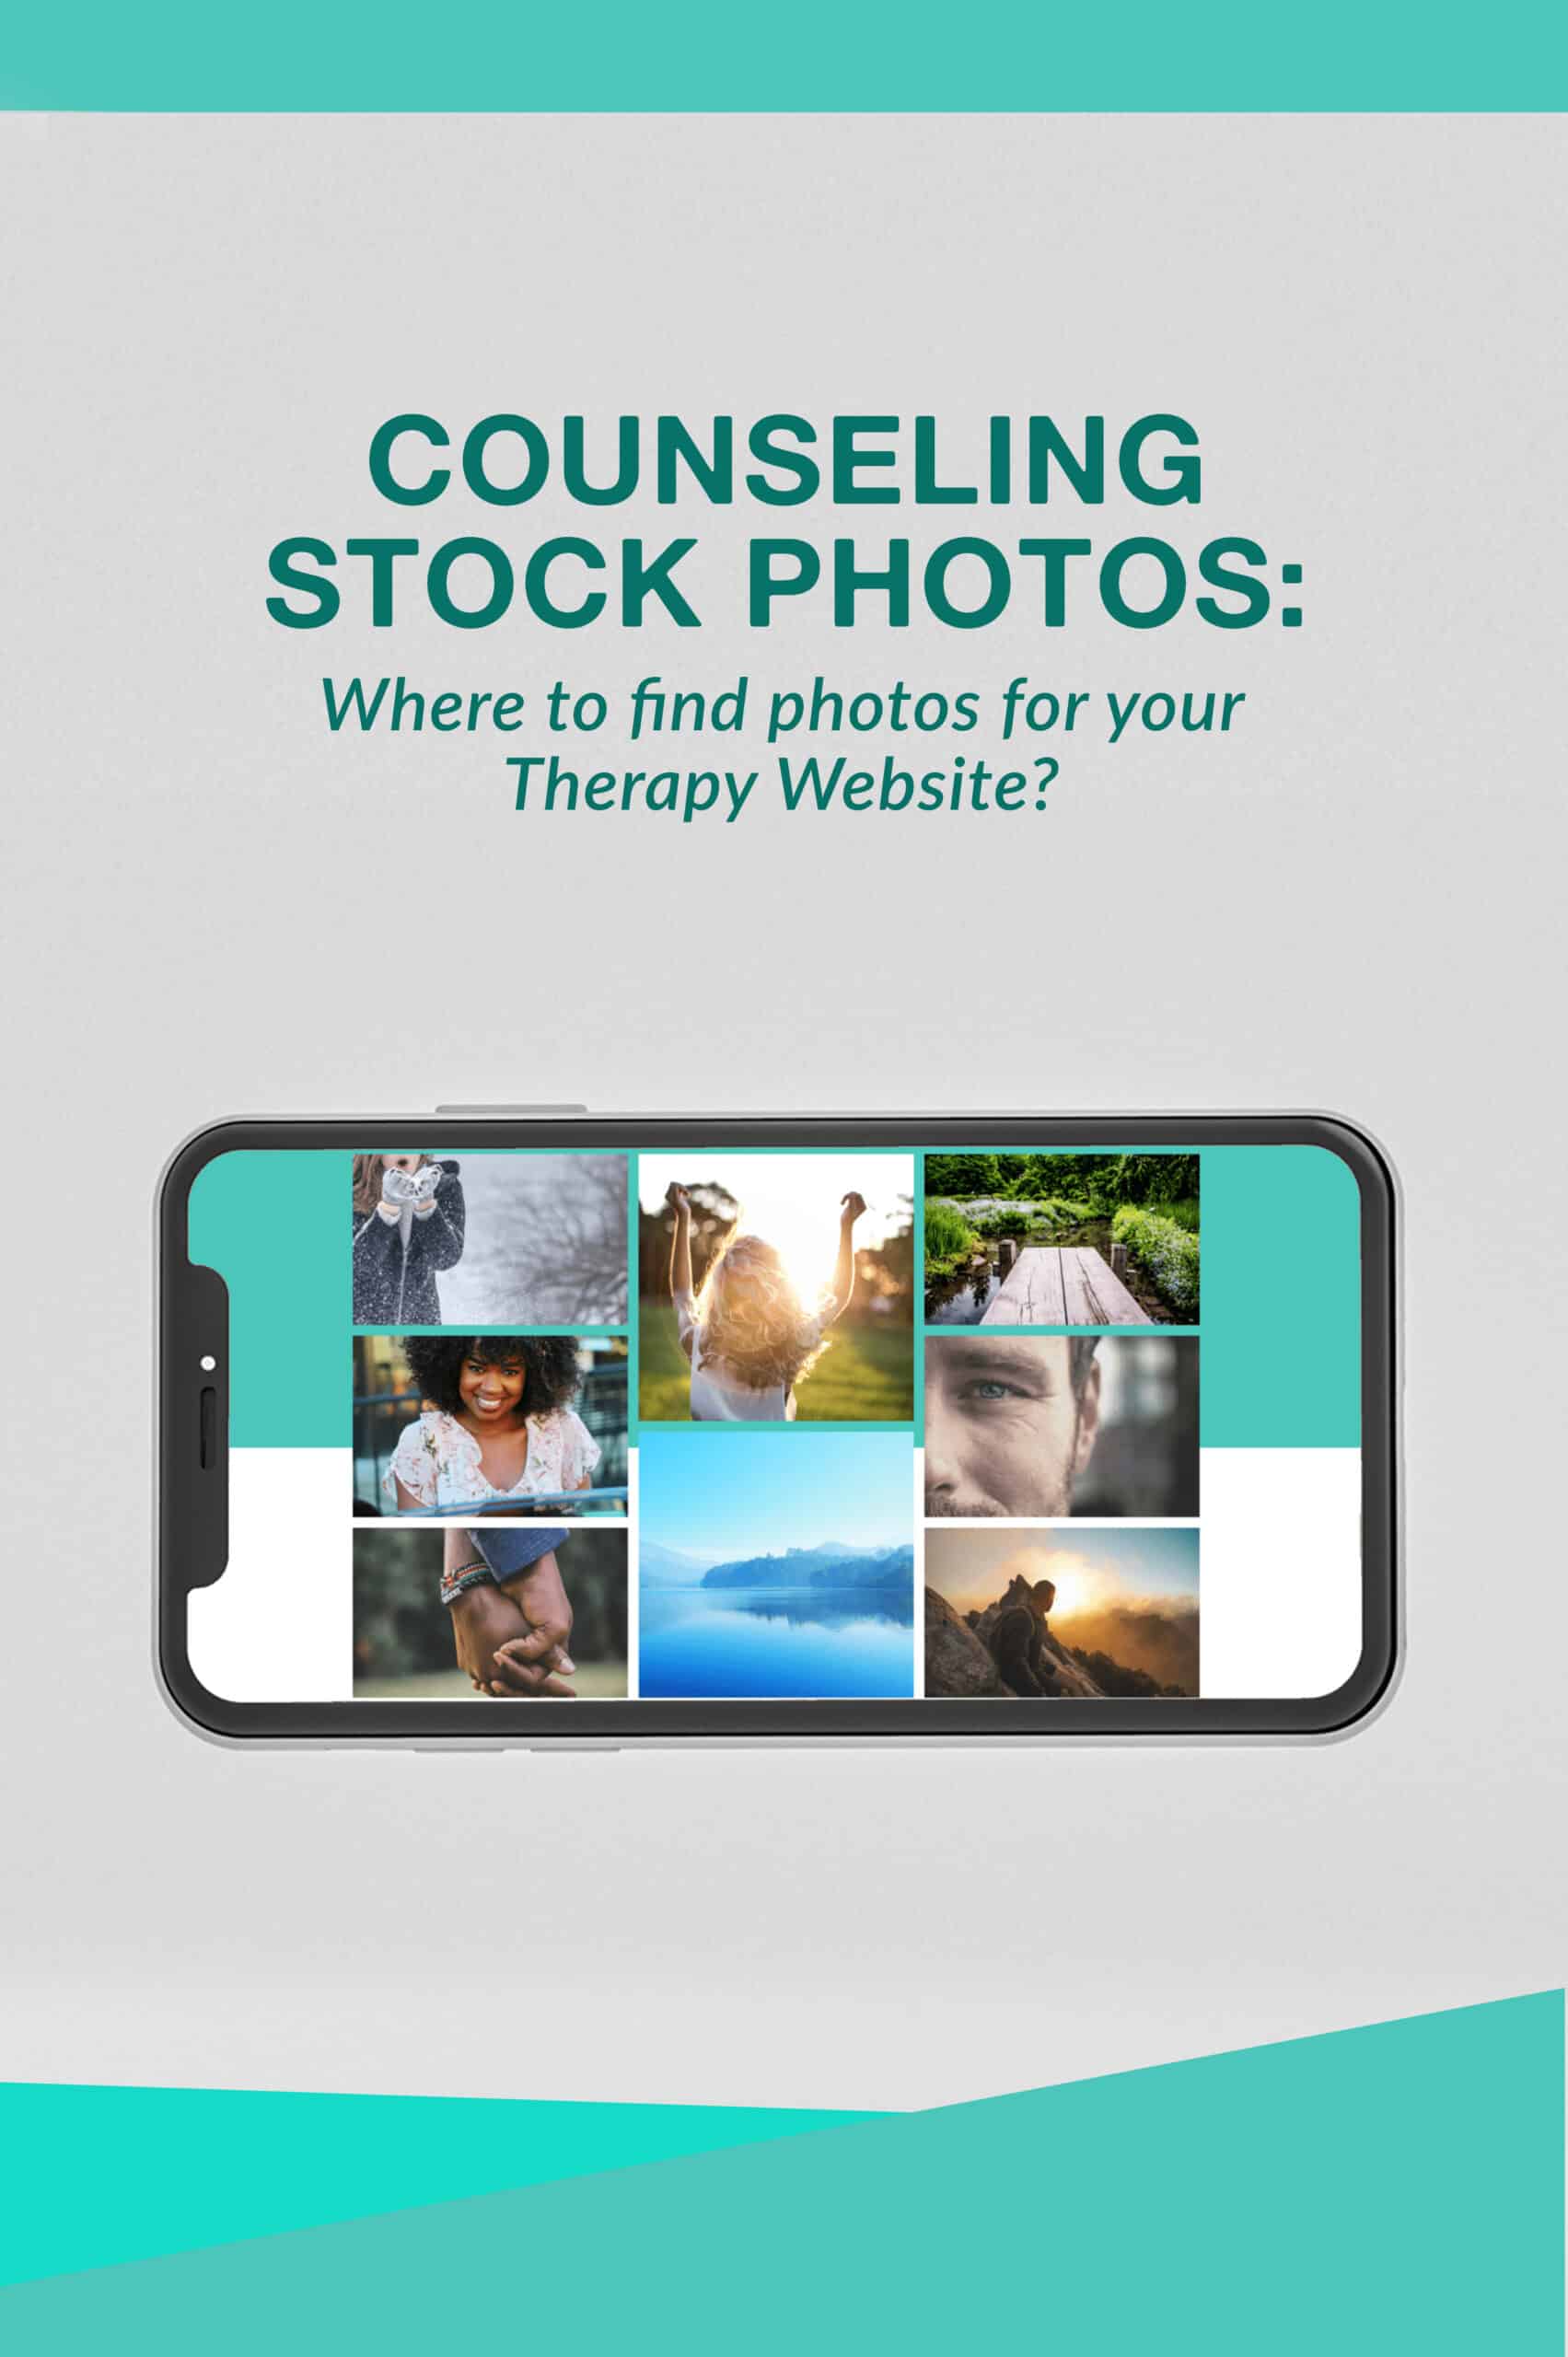 Counseling Stock Photos: Where to Find Photos for Your Therapy Website